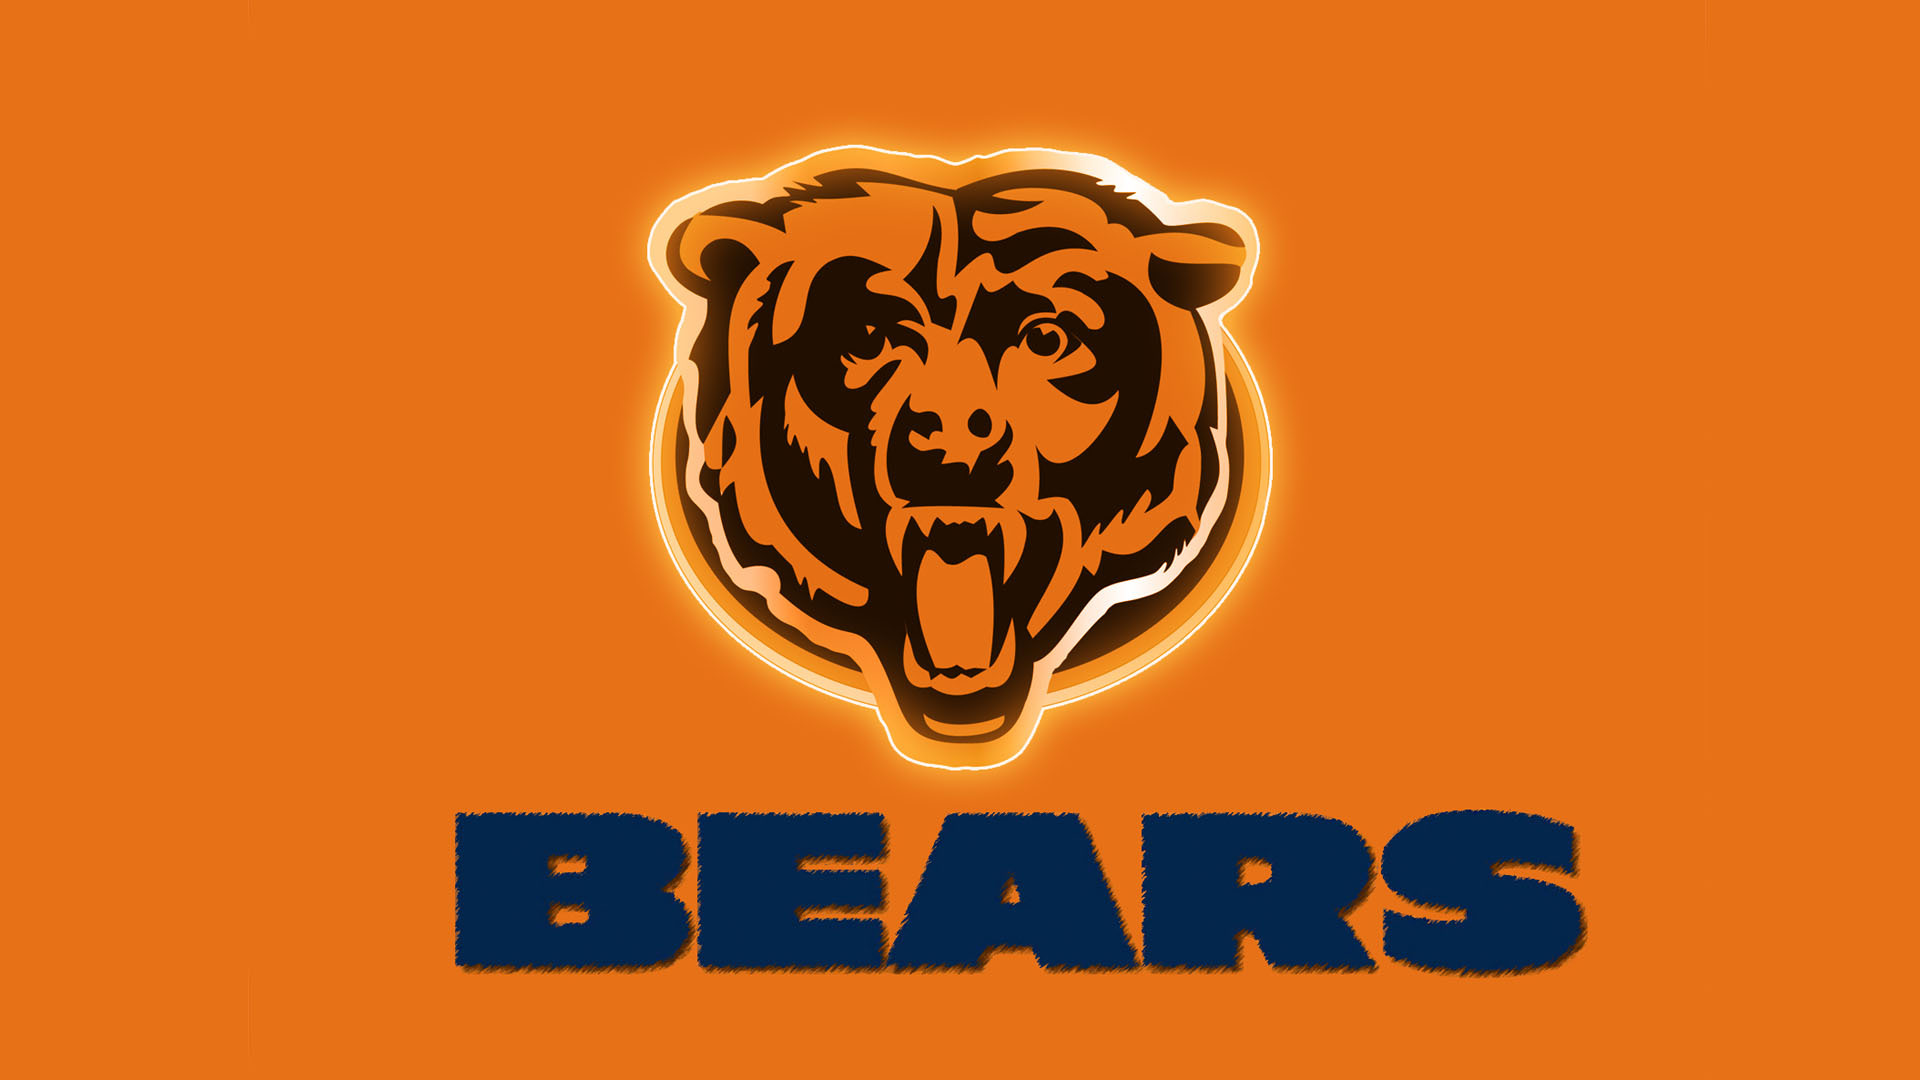 Chicago Bears Wallpapers Images Photos Pictures Backgrounds